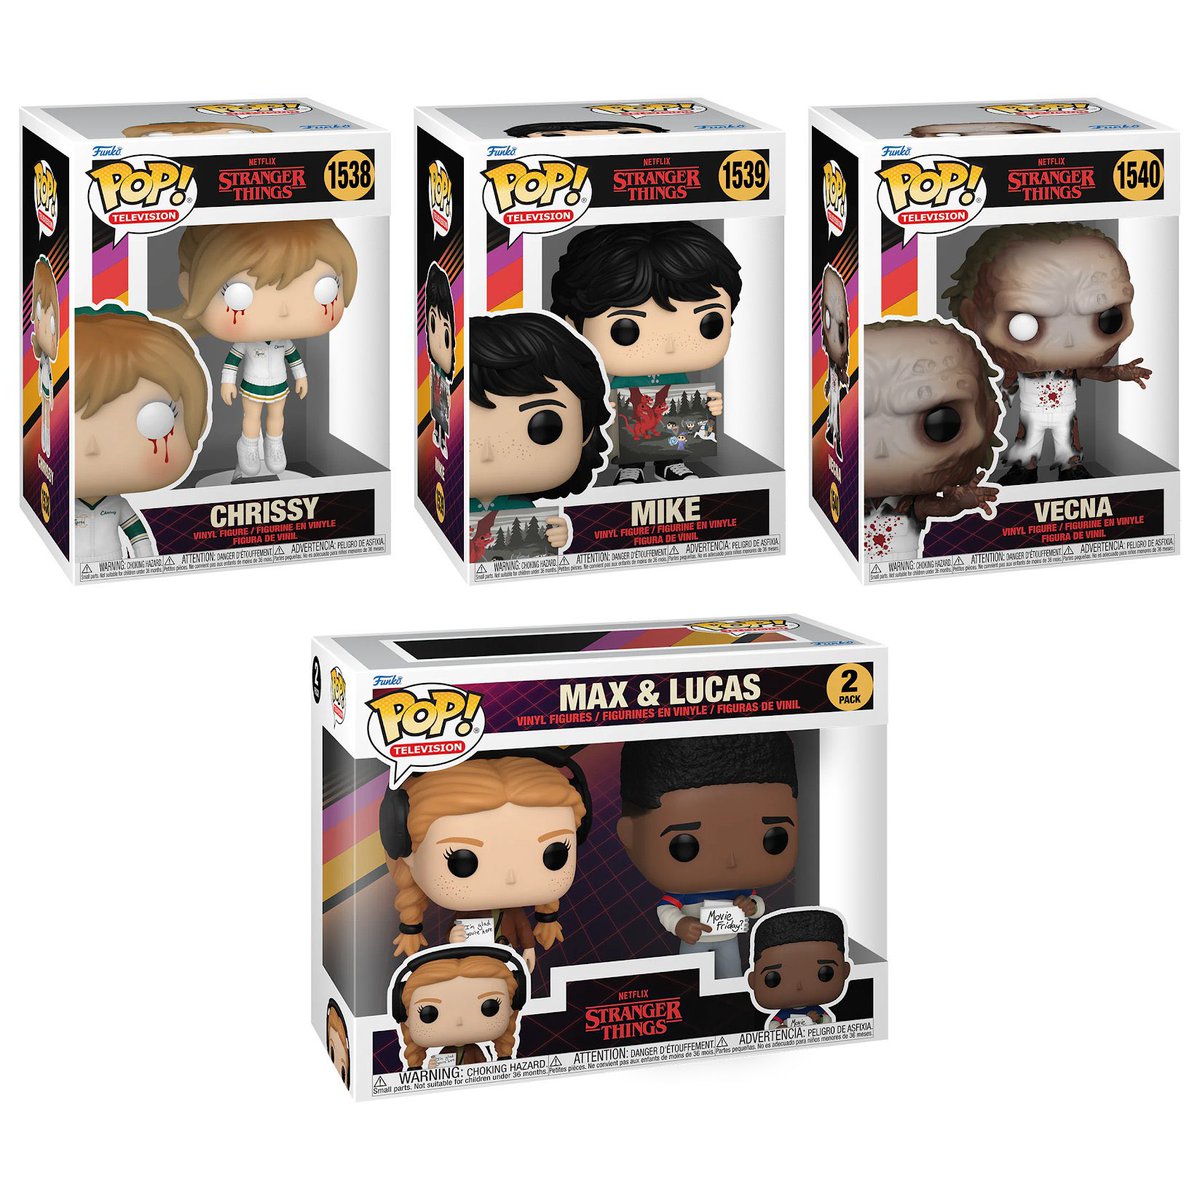 Preorder Now: Funko Pop! TV: Stranger Things 📦 Amazon: amzn.to/4agF2nP 🌎 Ent Earth: ee.toys/PW0UXI * No Charge Until it Ships #Ad #StrangerThings #Funko #FunkoPop #FunkoPops #FunkoPopVinyl #Pop #PopVinyl #FunkoCollector #Collectible #Collectibles #Toy #Toys